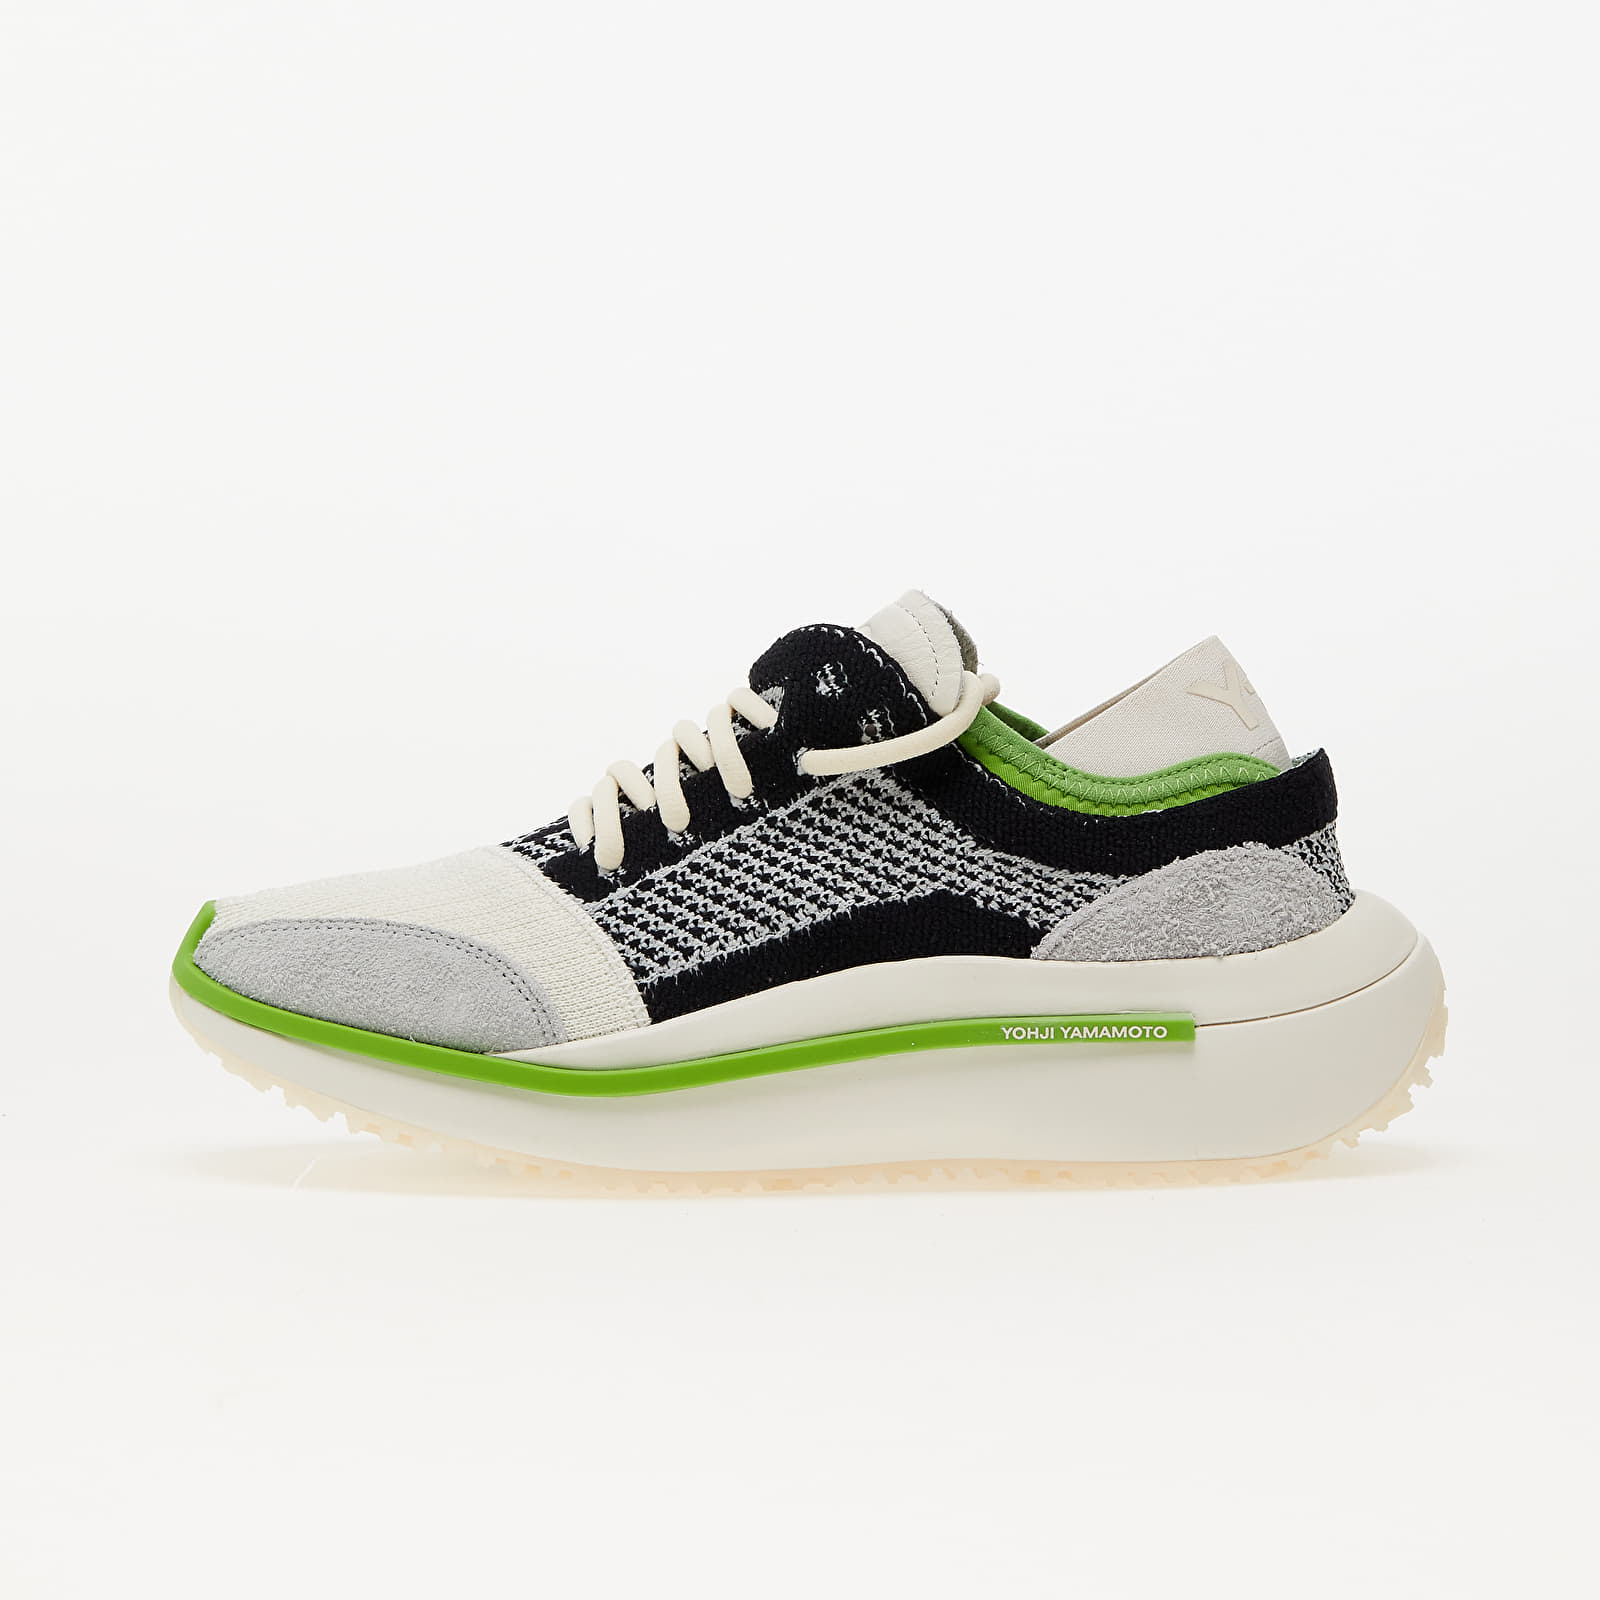 Men's shoes Y-3 Qisan Knit Off White/ Wonder Silver/ Team Green